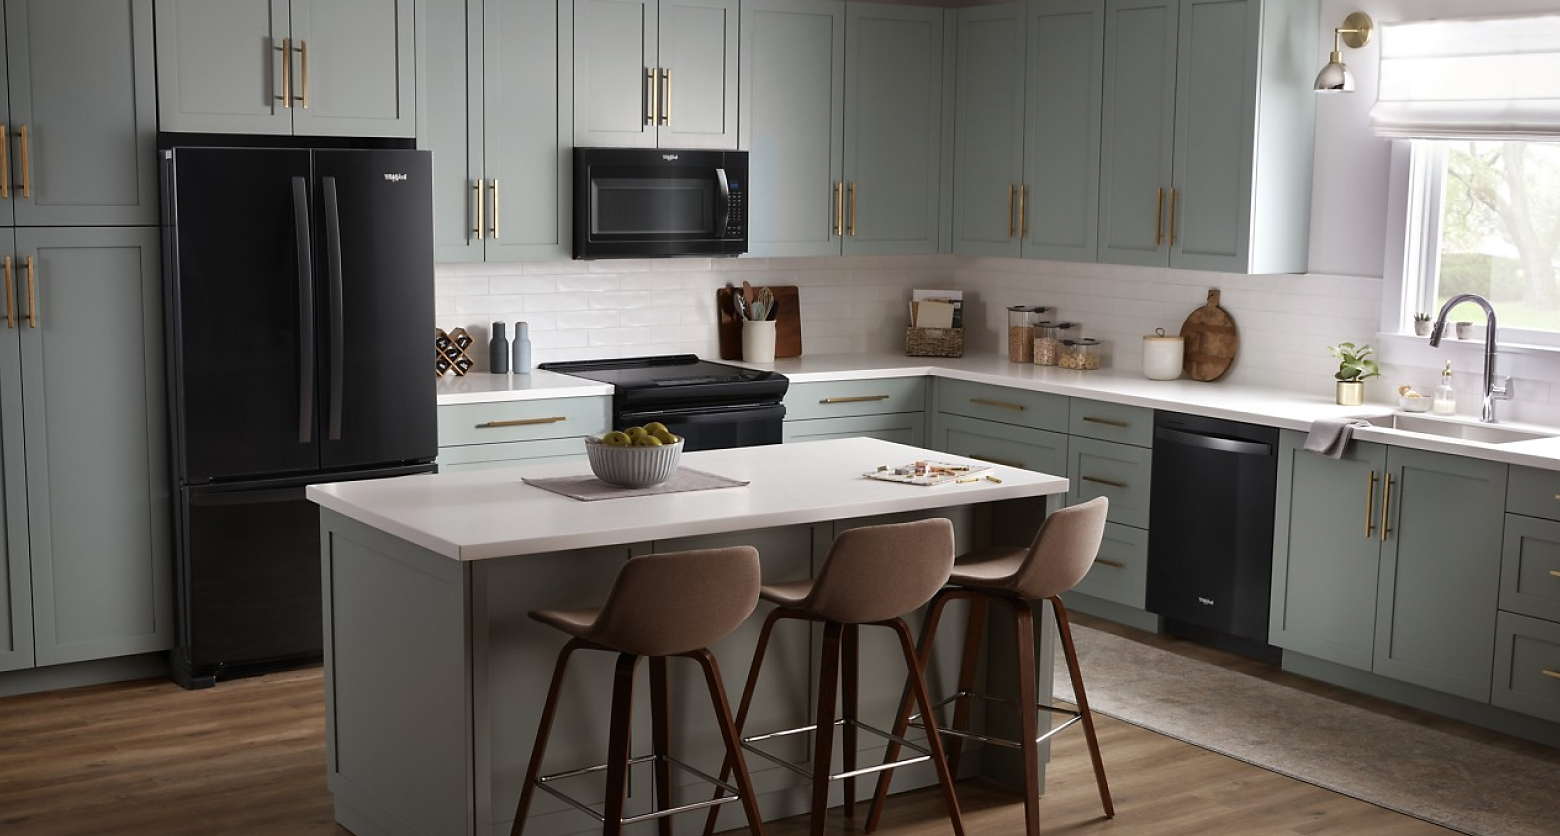 Gray kitchen featuring Whirlpool®  appliances in black